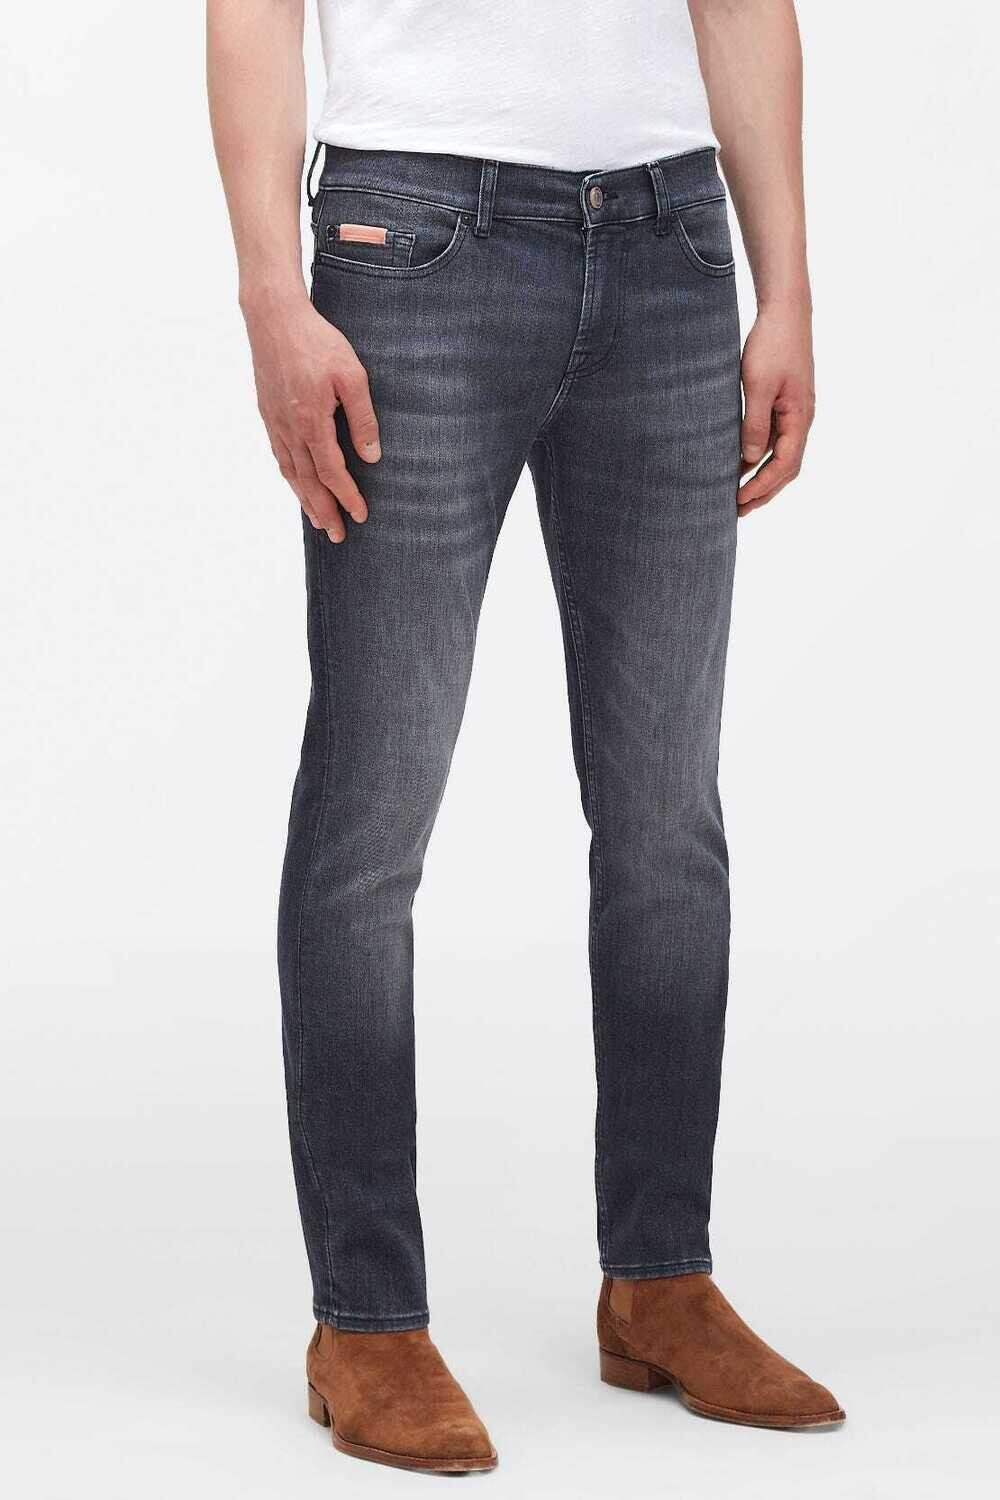 7 For All Mankind Ronnie Jeans